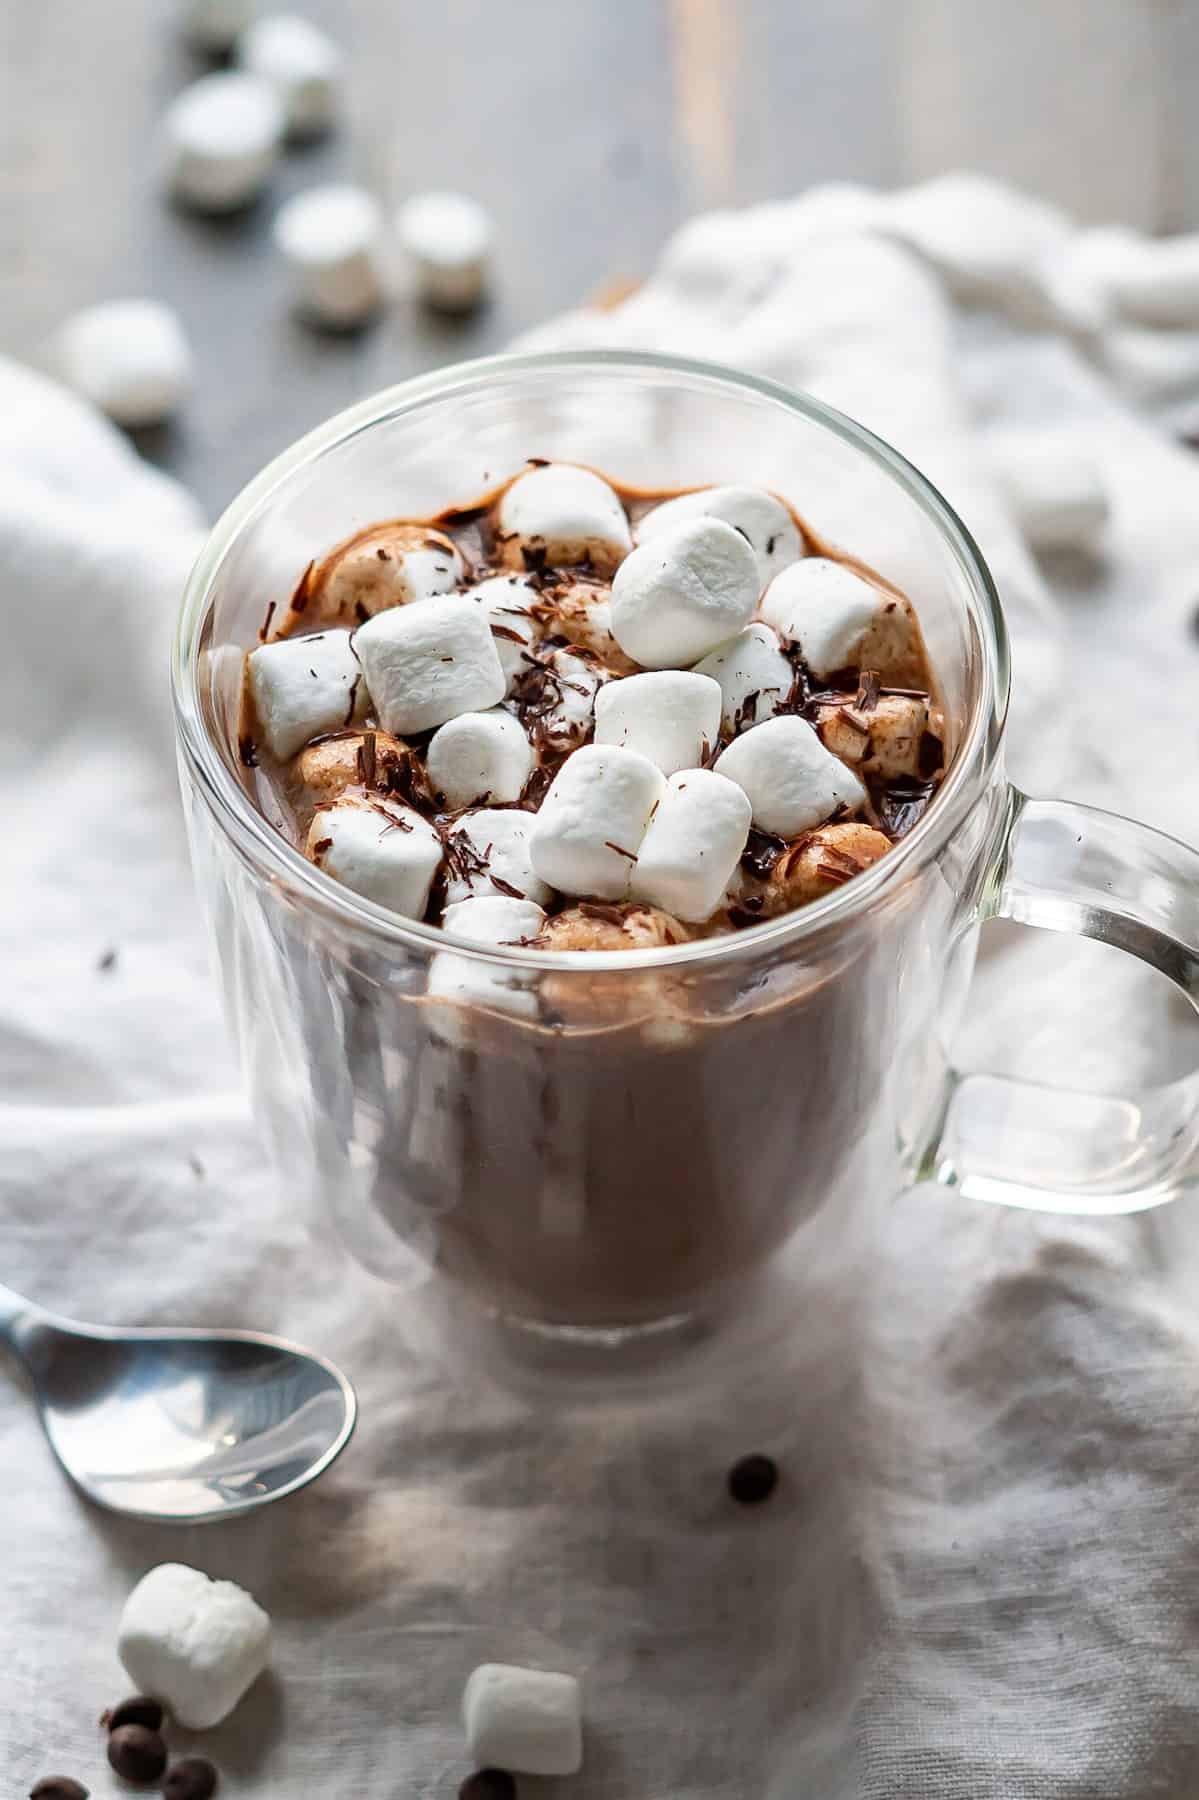 https://vibrantlygfree.com/wp-content/uploads/2023/01/Microwave-hot-chocolate-with-chocolate-chips-4.jpg